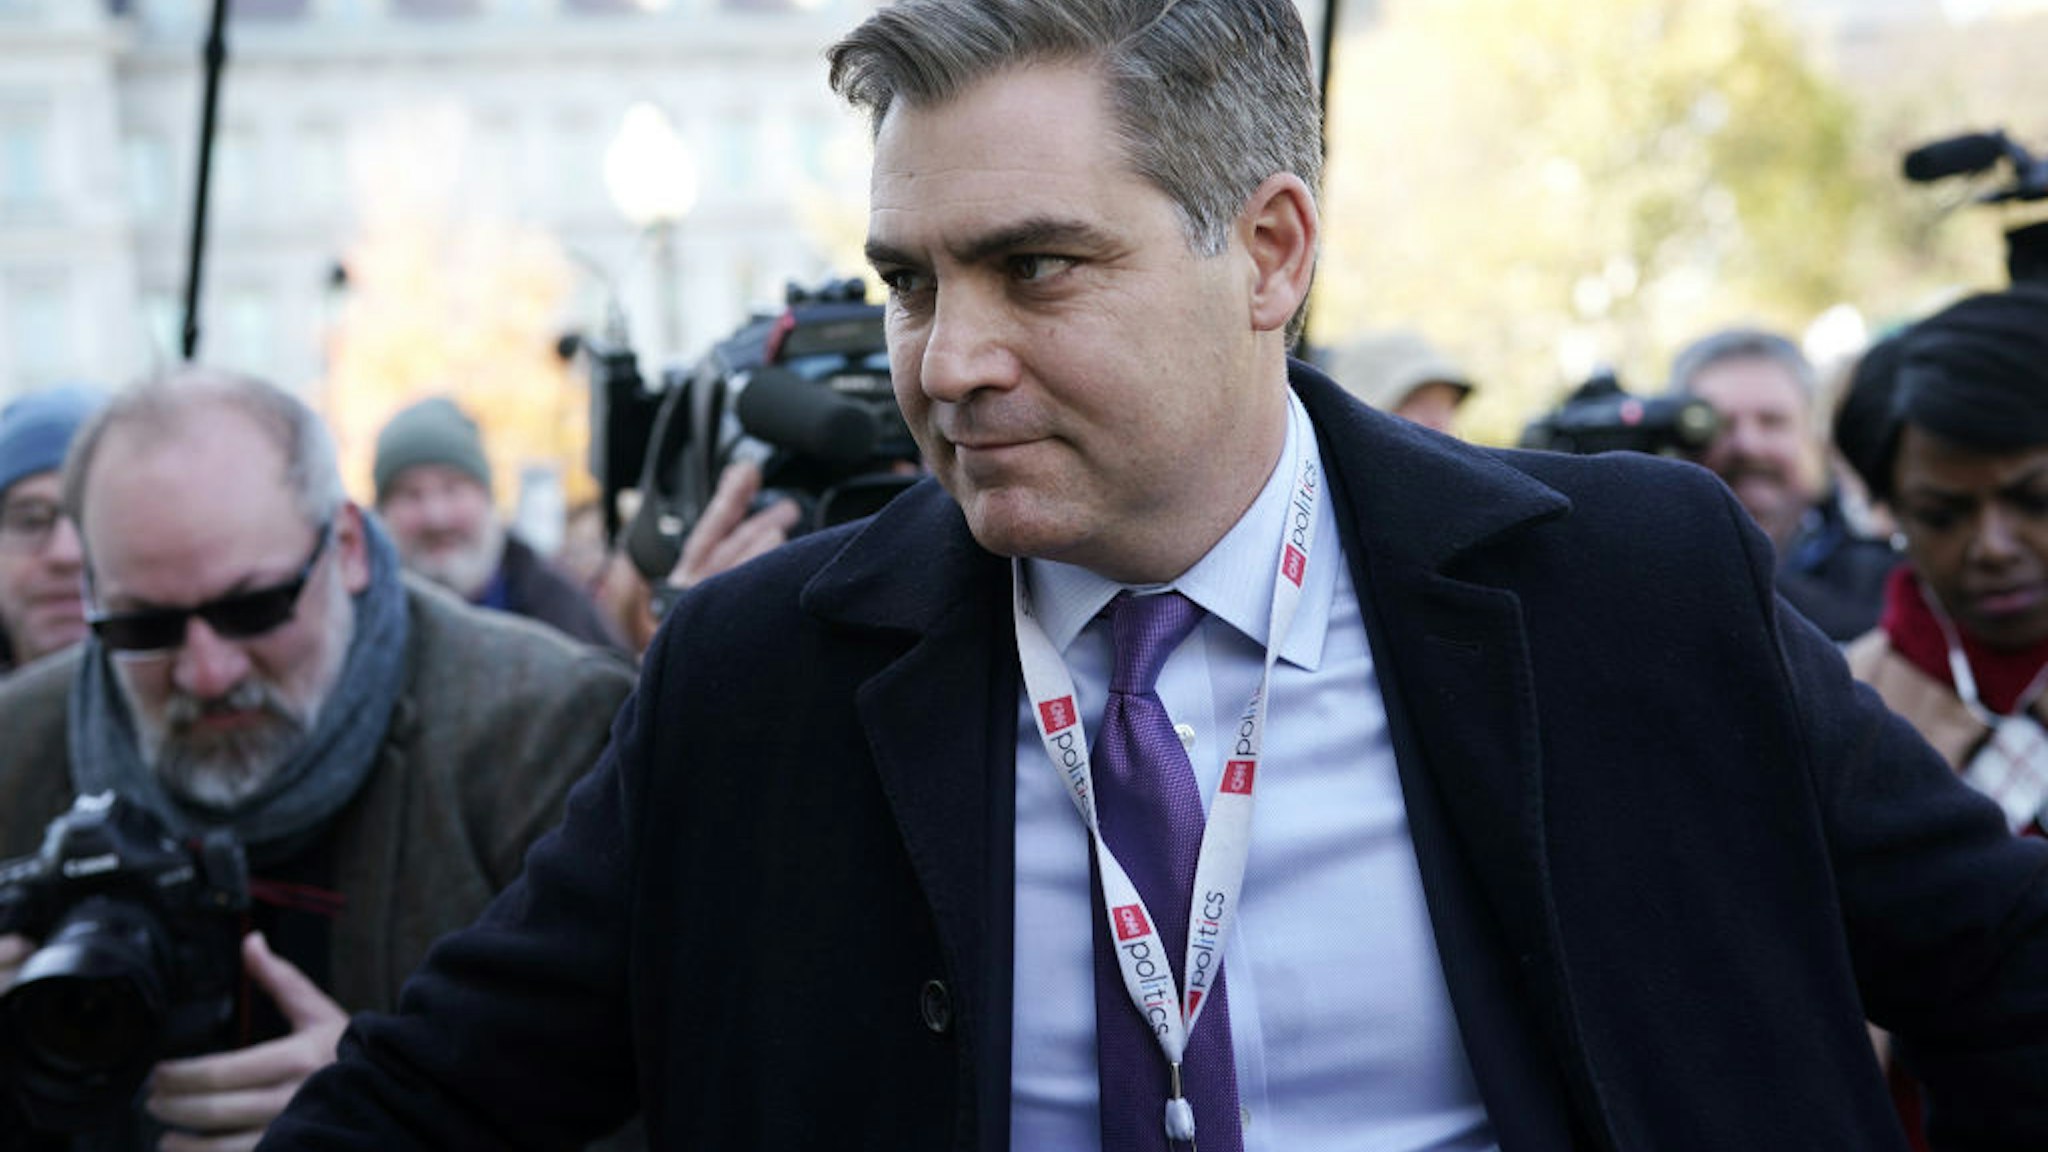 WASHINGTON, DC - NOVEMBER 16: CNN chief White House correspondent Jim Acosta returns to the White House after Federal judge Timothy J. Kelly ordered the White House to reinstate his press pass November 16, 2018 in Washington, DC. CNN has filed a lawsuit against the White House after Acosta's press pass was revoked after a dispute involving a news conference last week. (Photo by Alex Wong/Getty Images)